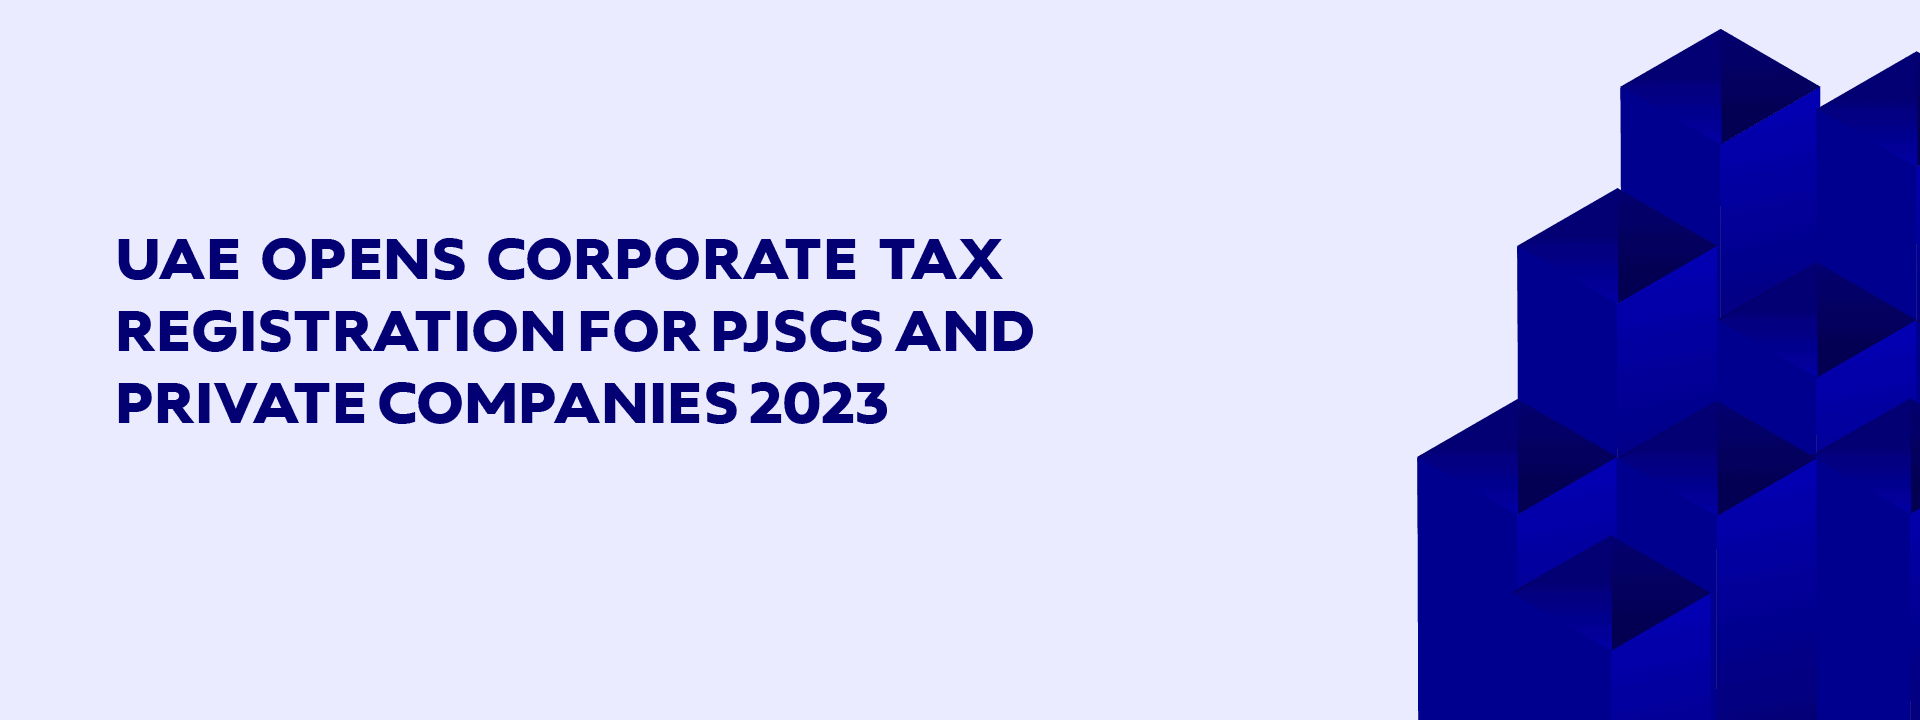 UAE OPENS CORPORATE TAX REGISTRATION FOR PJSCS AND PRIVATE COMPANIES 2023